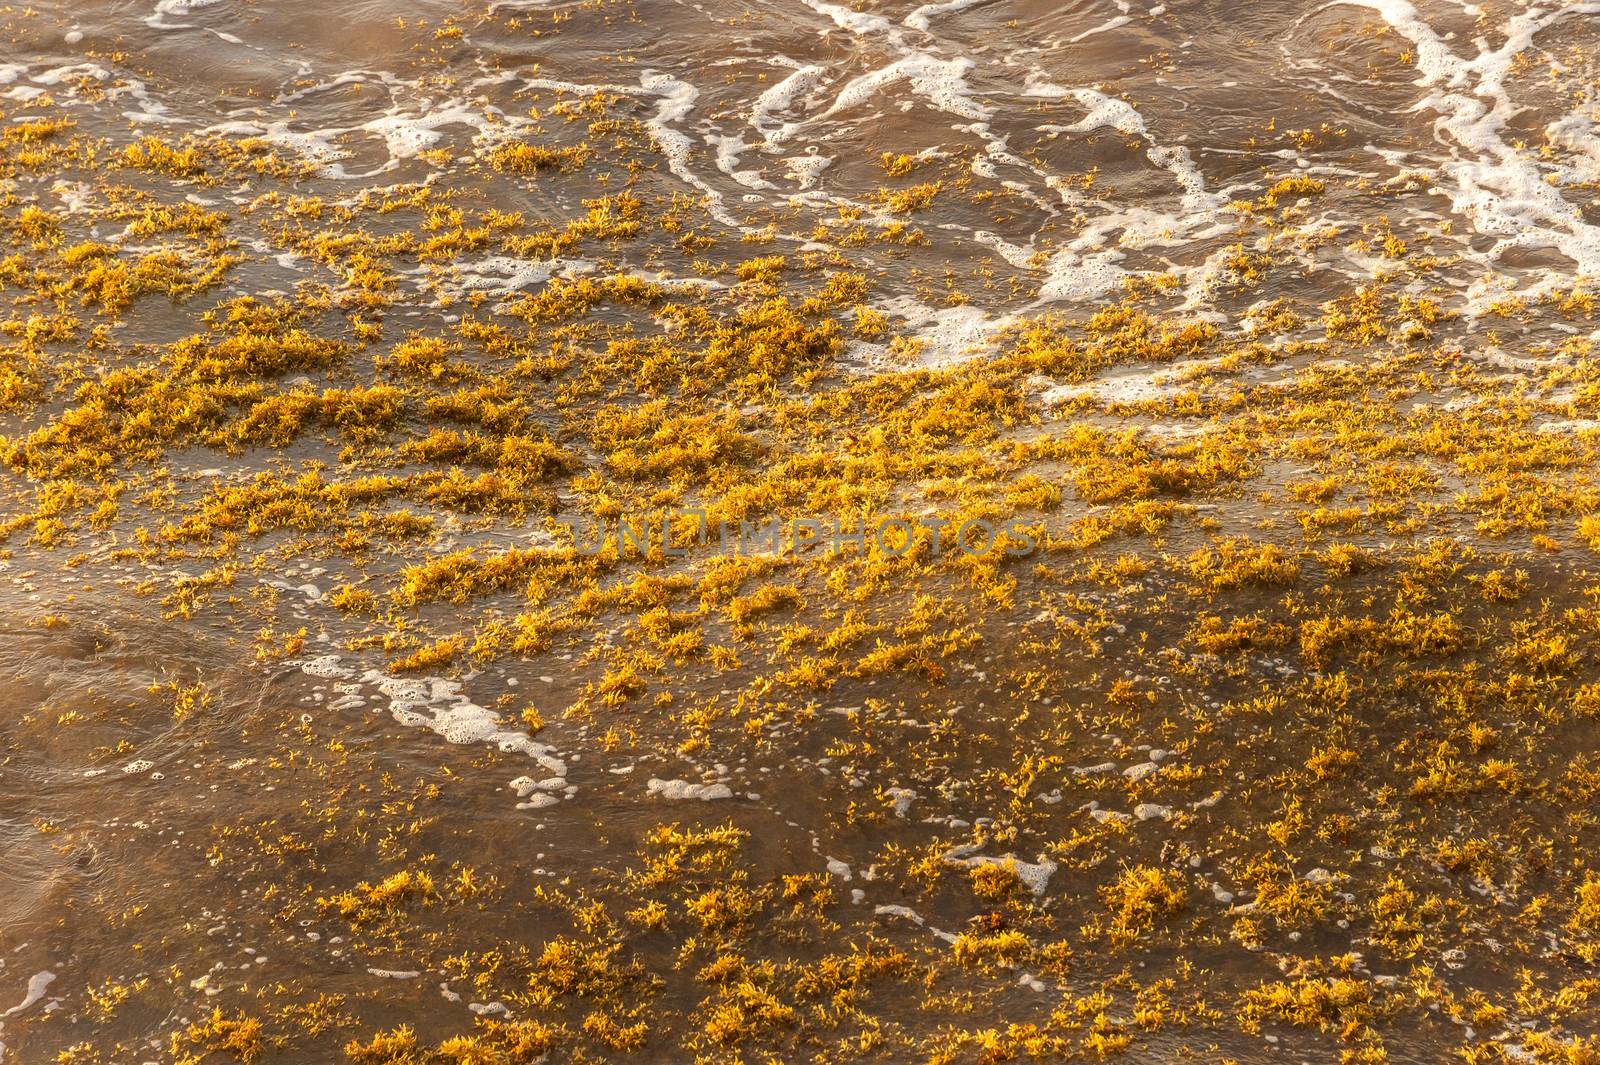 Sargassum seaweed patch floating on the water in Tulum, Mexico.